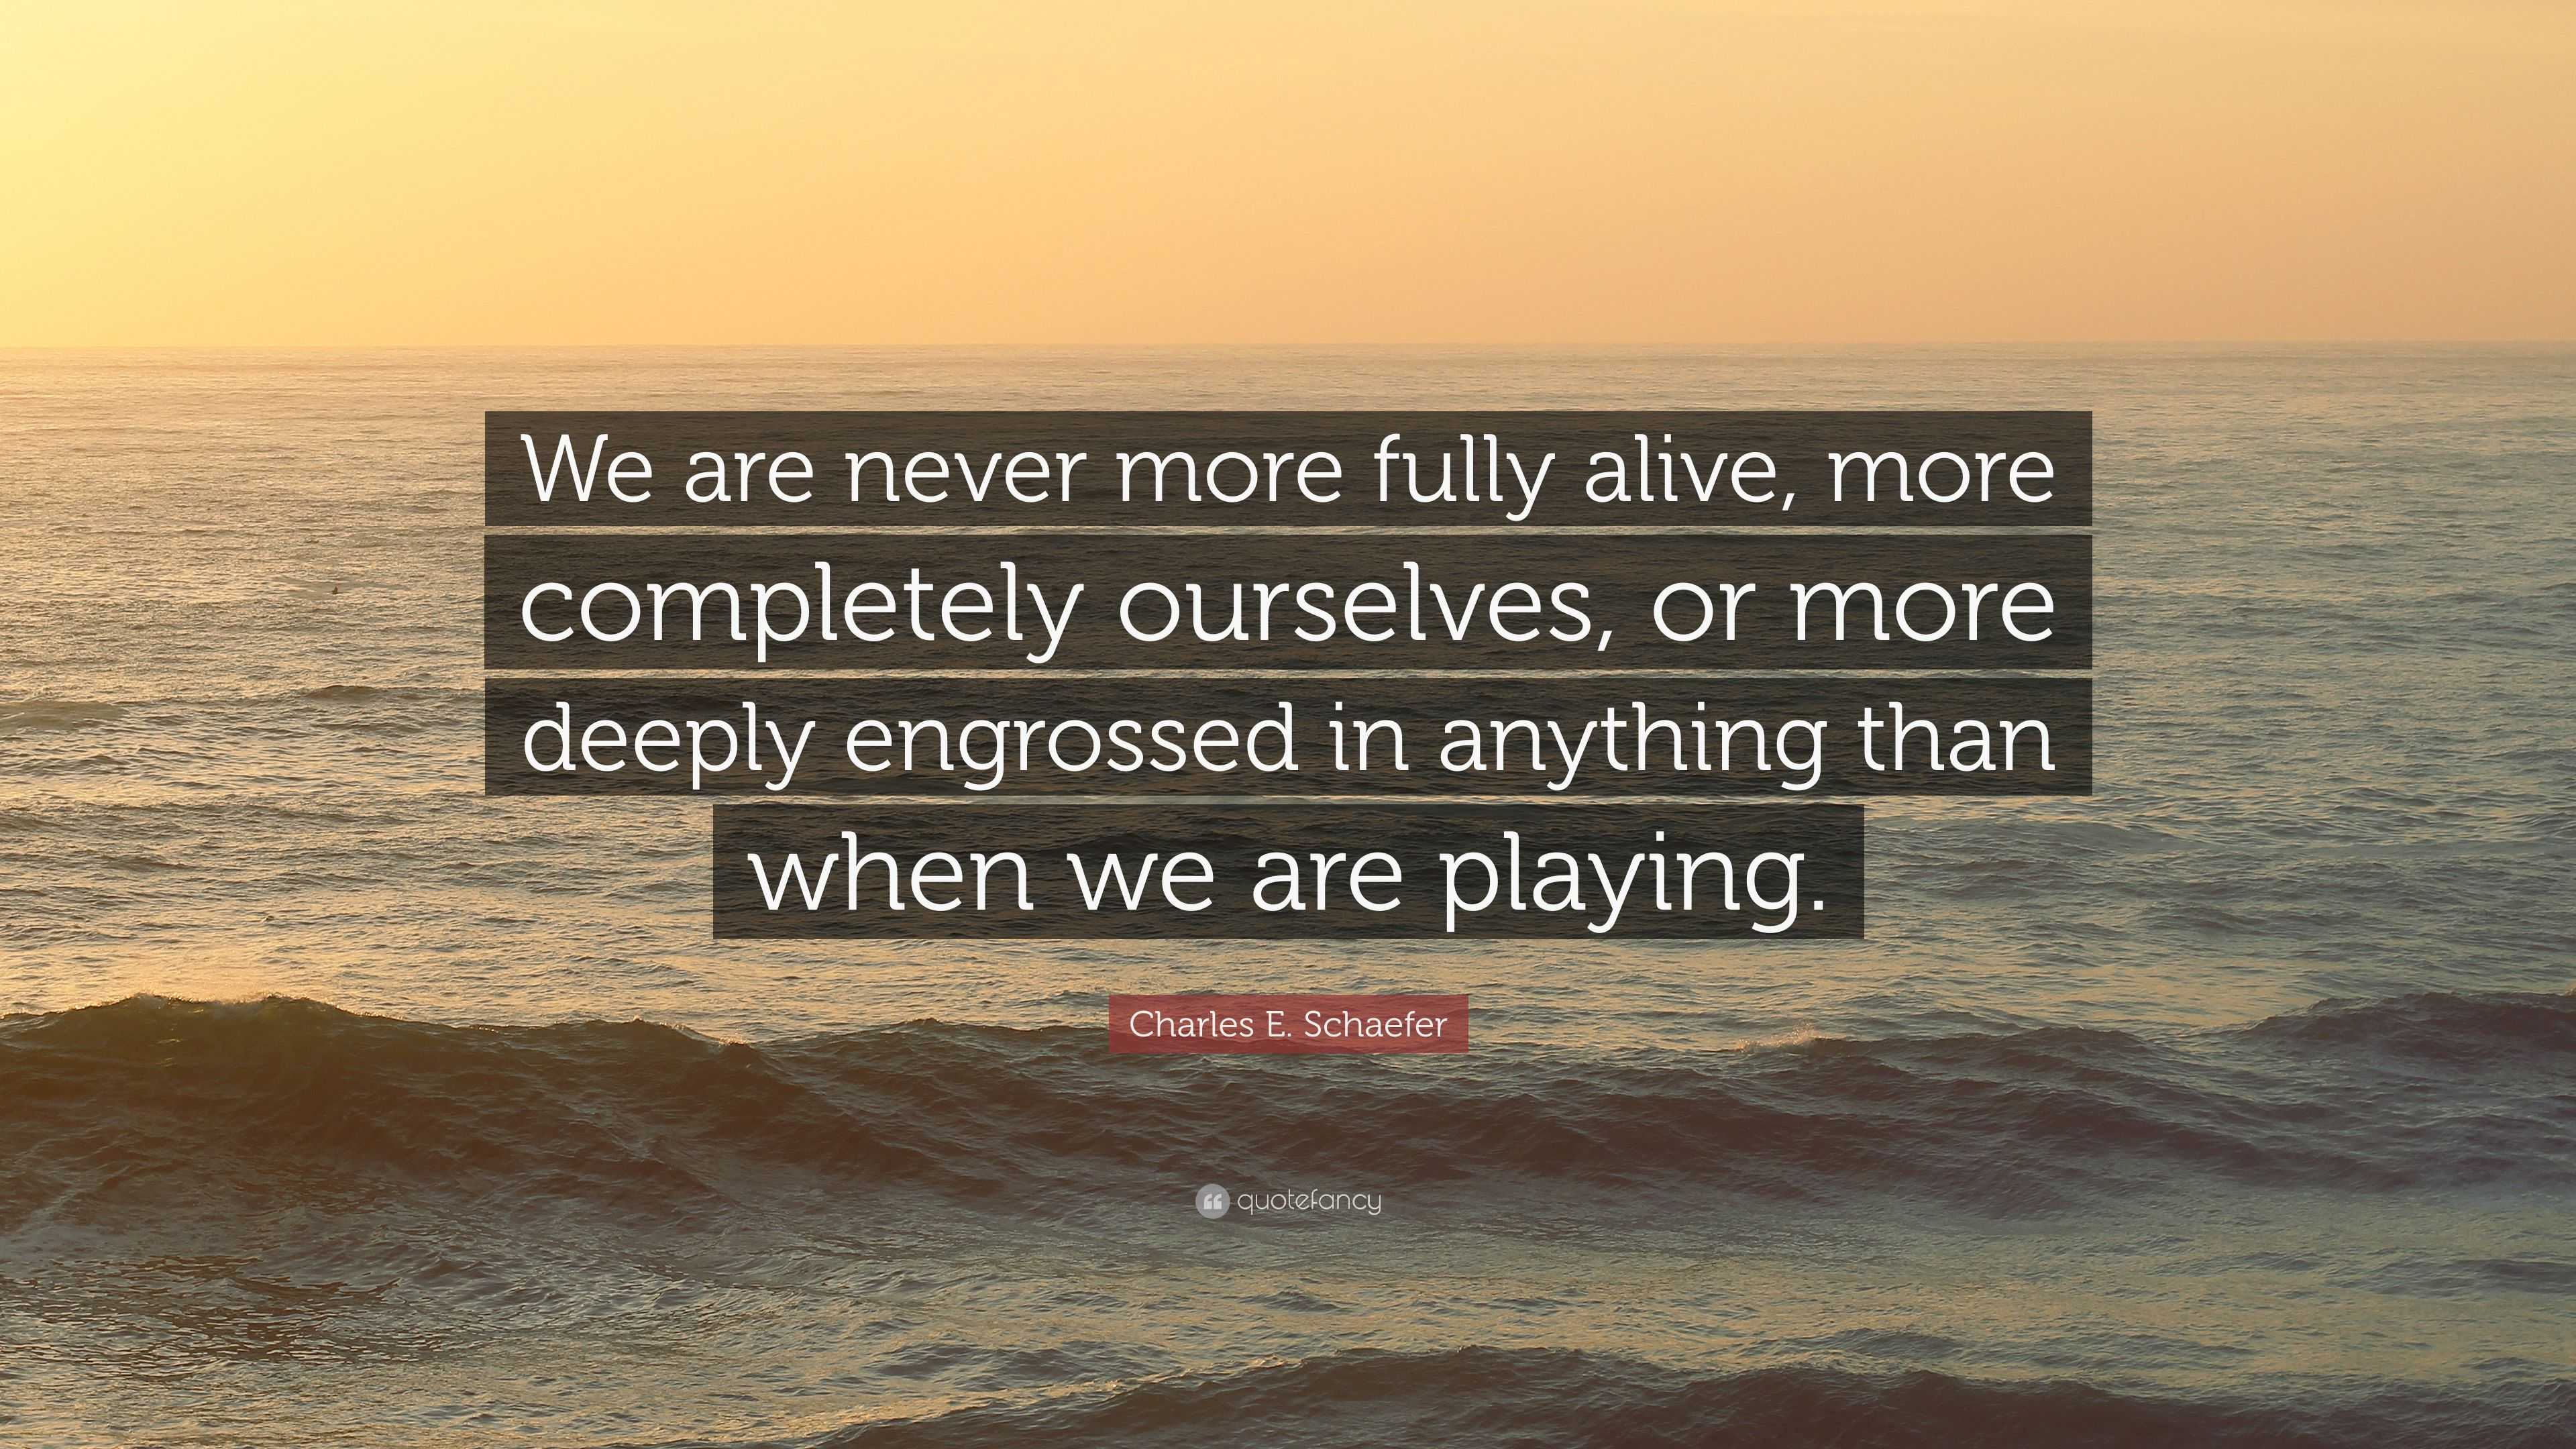 Charles E. Schaefer Quote: “We are never more fully alive, more ...